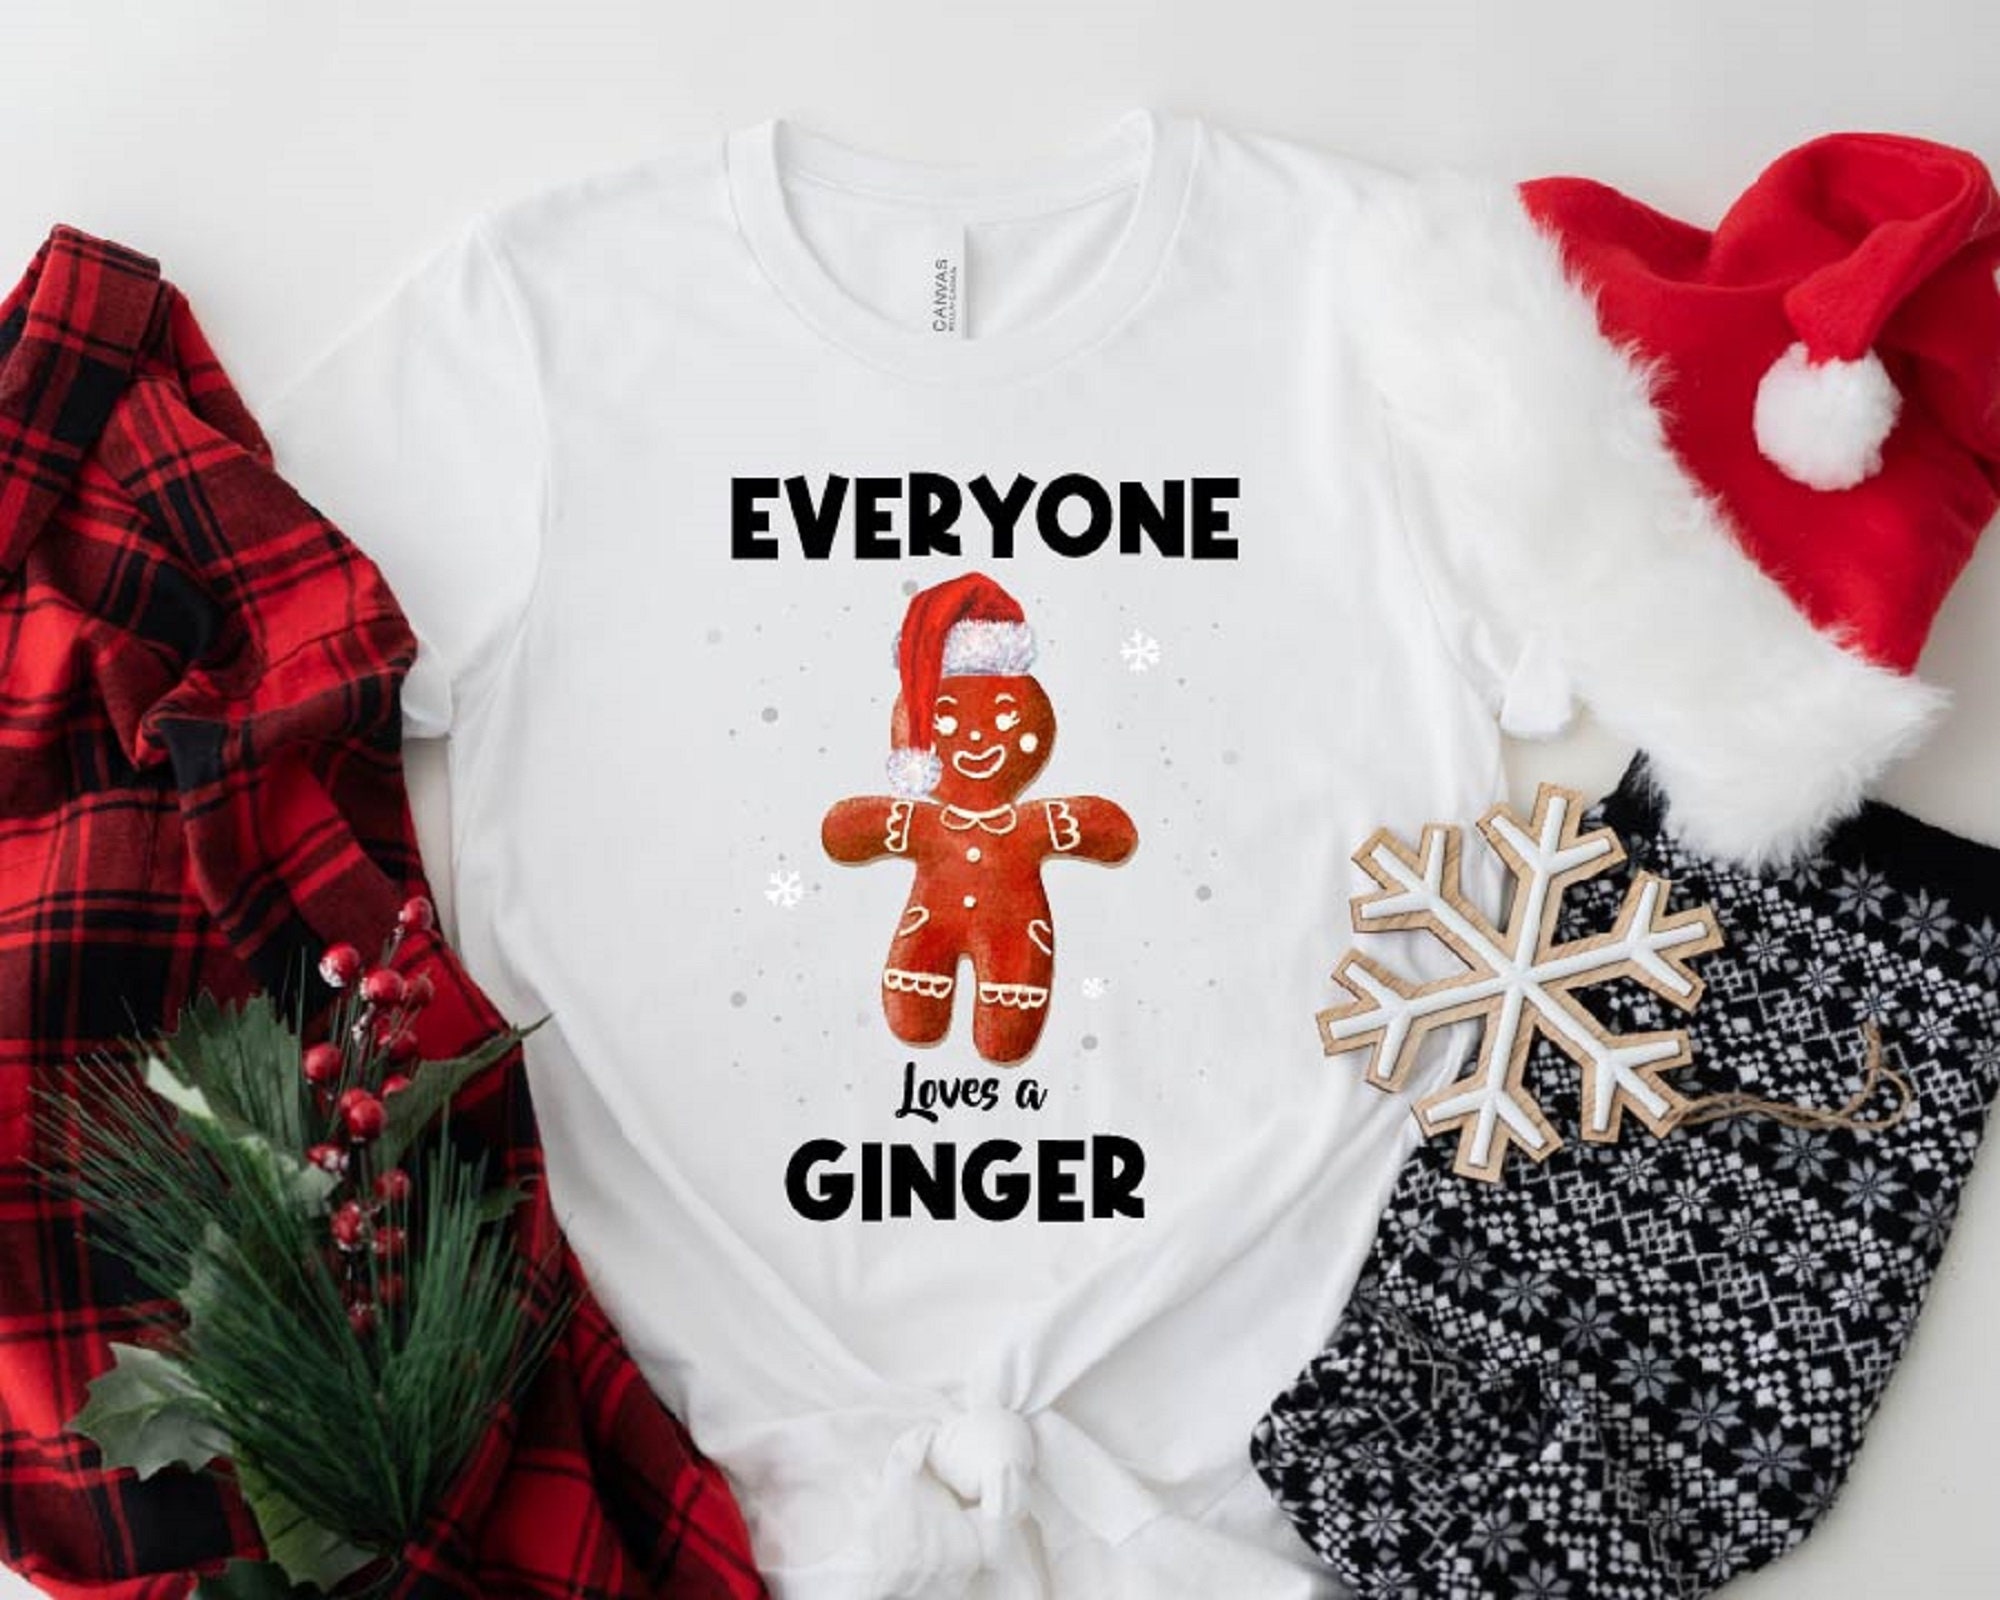 Discover Everyone Loves A Ginger Shirt, Funny Christmas Gingerbread Tee